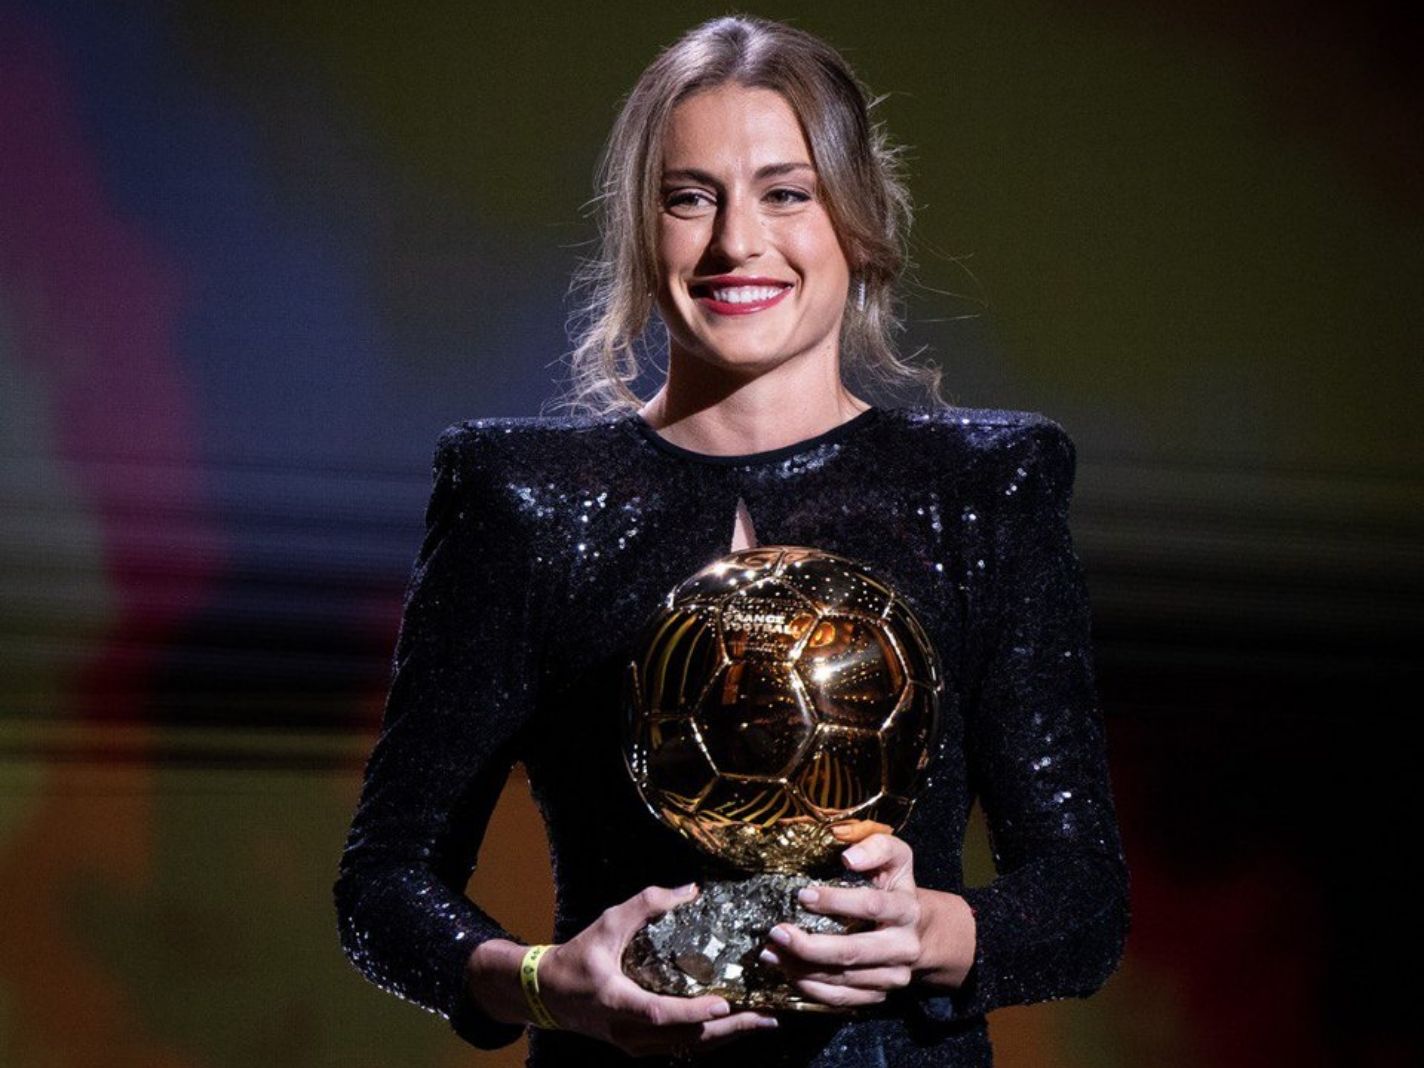 How many Instagram followers did Alexia Putellas gain after winning Ballon d’Or?